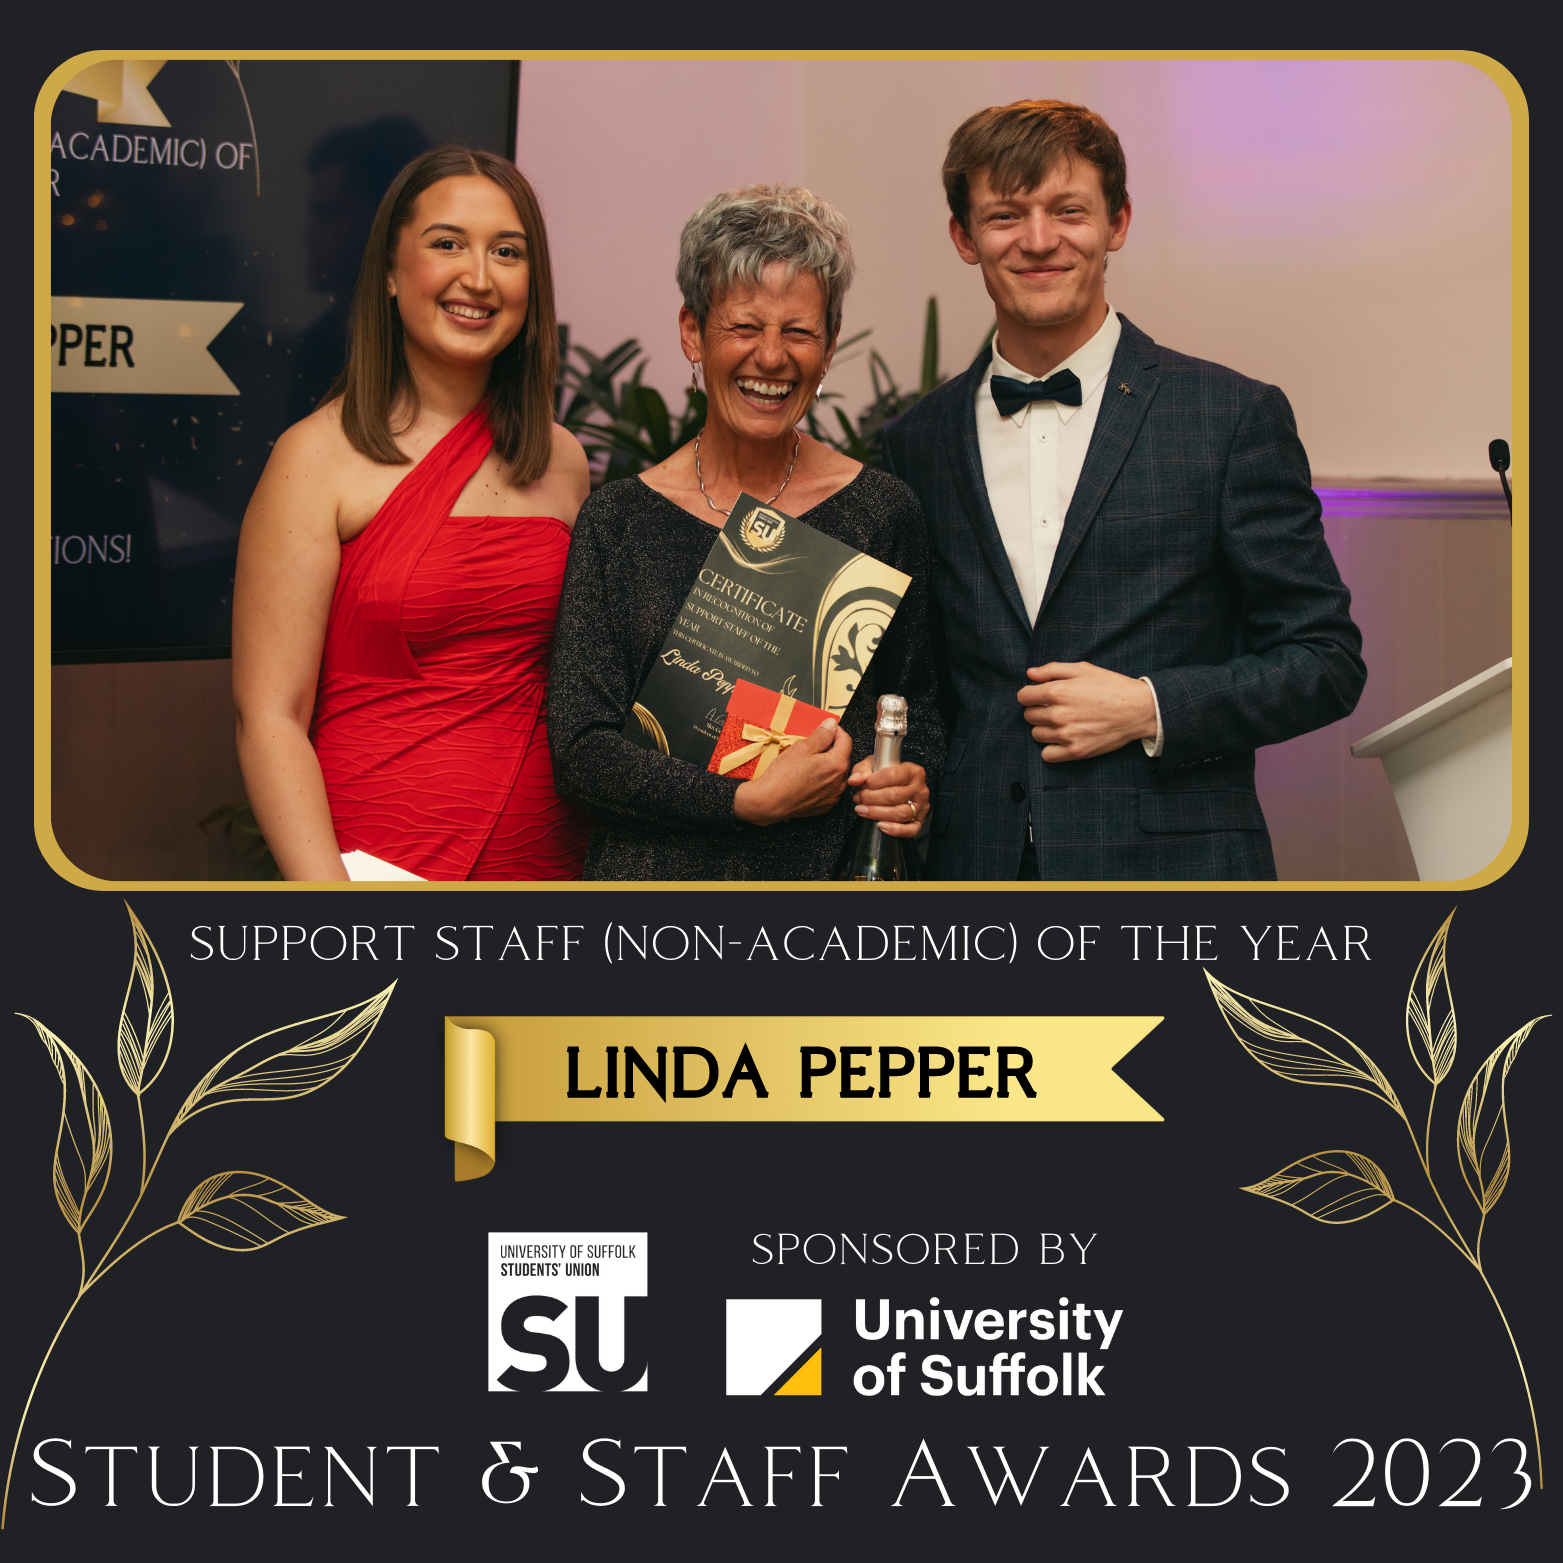 support staff of the year, linda pepper, pictured holding her certificate with previous su president alex gooch and awards host jessica